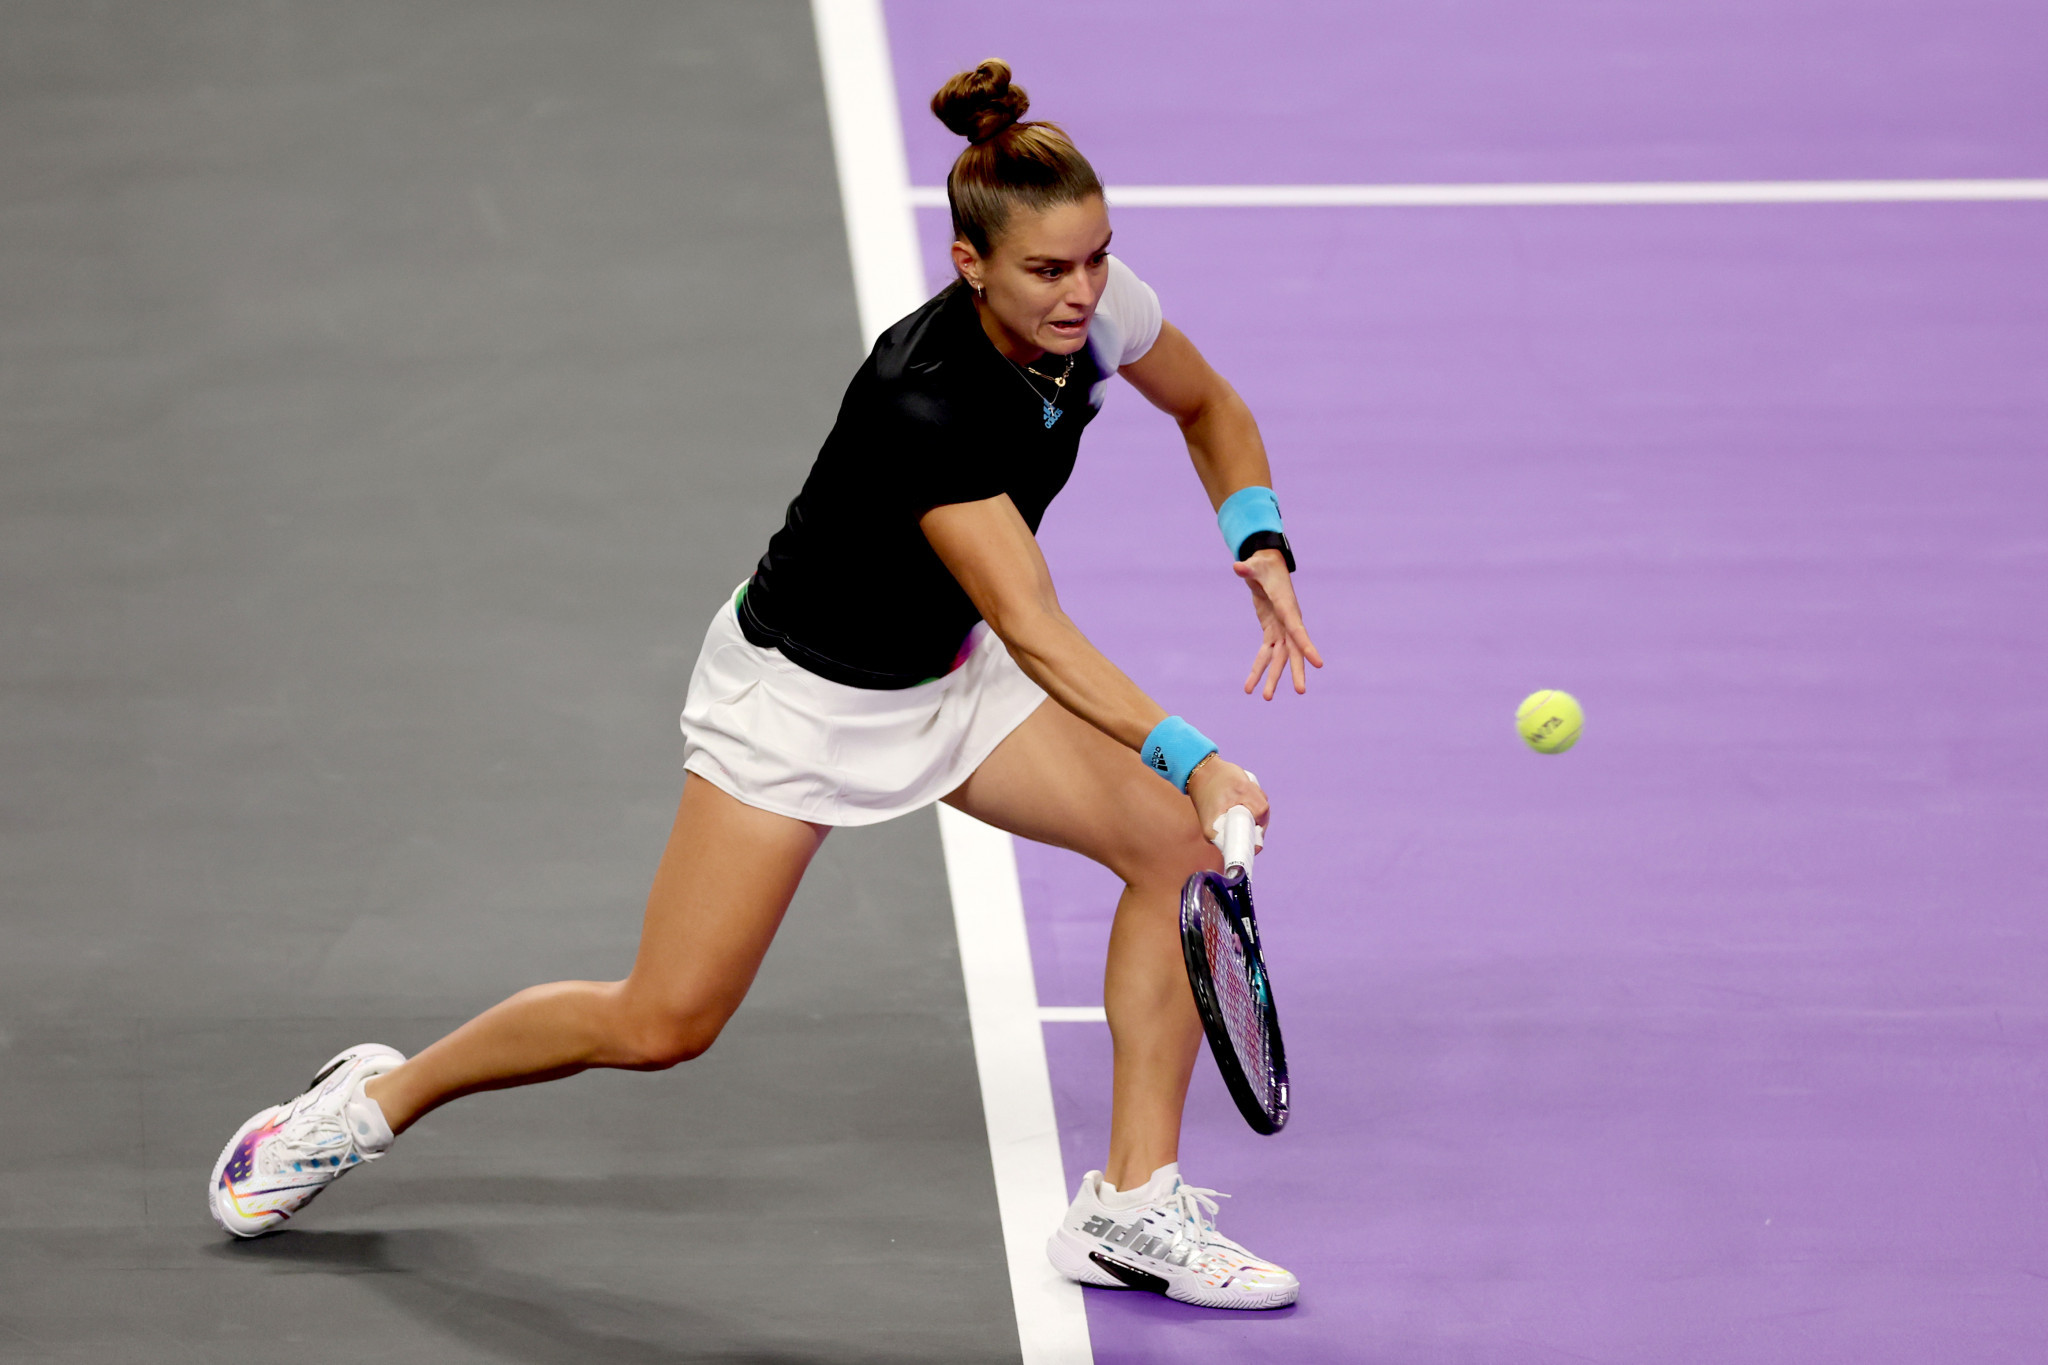 Greece's Maria Sakkari overcame the United States' Jessica Pegula on the first day of the WTA Finals ©Getty Images